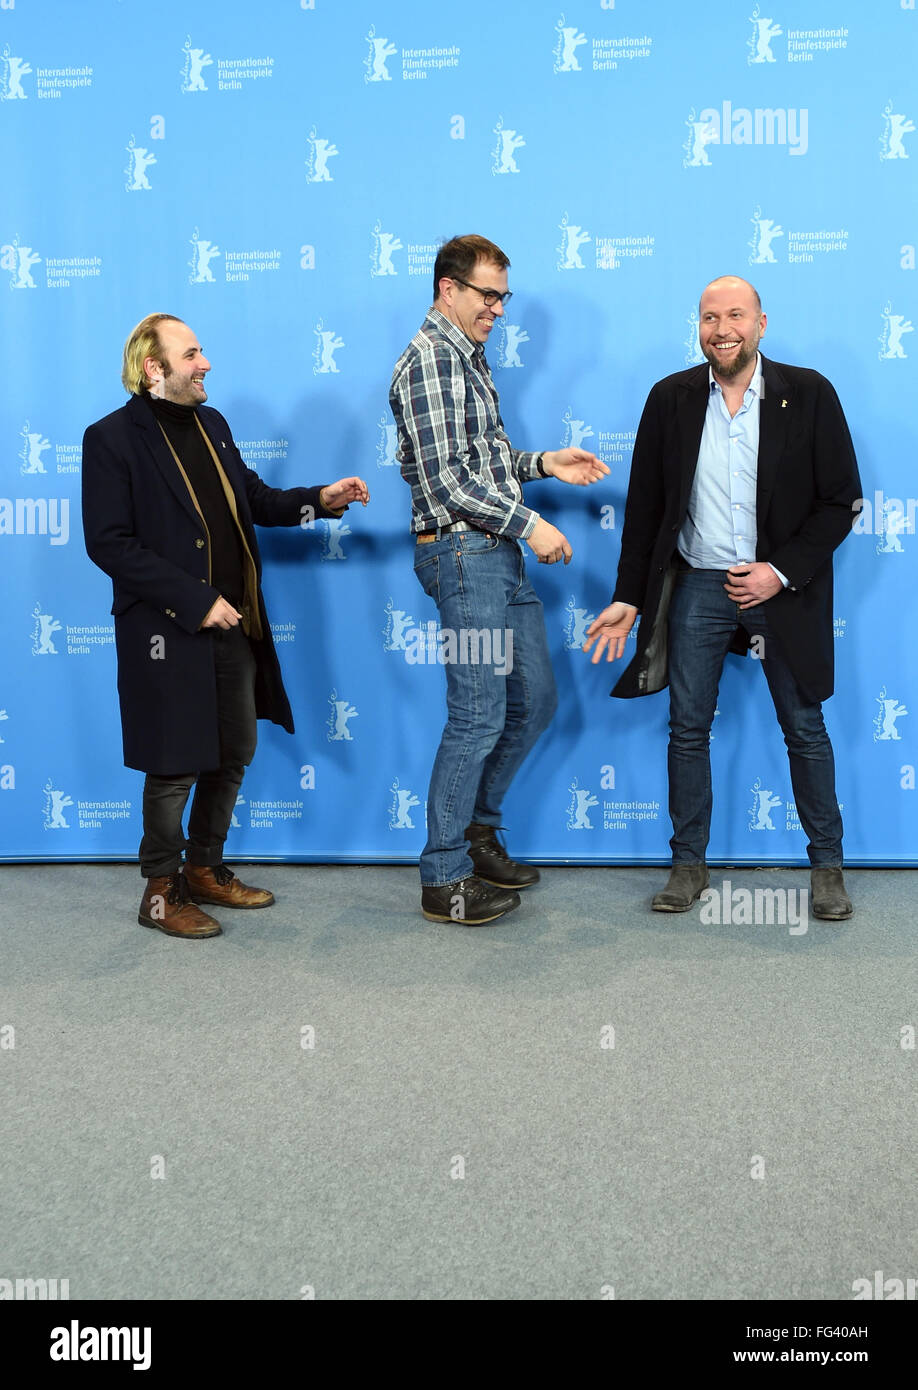 Berlin, Germany. 17th Feb, 2016. 66th International Film Festival in Berlin, Germany, 17 February 2016. Photo call 'Des nouvelles de la planete Mars' ('News from planet Mars': Director Dominik Moll (C) and actors Vincent Macaigne (L) and Francois Damiens. The film is shown in the Berlinale Competition (Out of Competition). The Berlinale runs from 11 February to 21 February 2016. Photo: Jens Kalaene/dpa/Alamy Live News Stock Photo